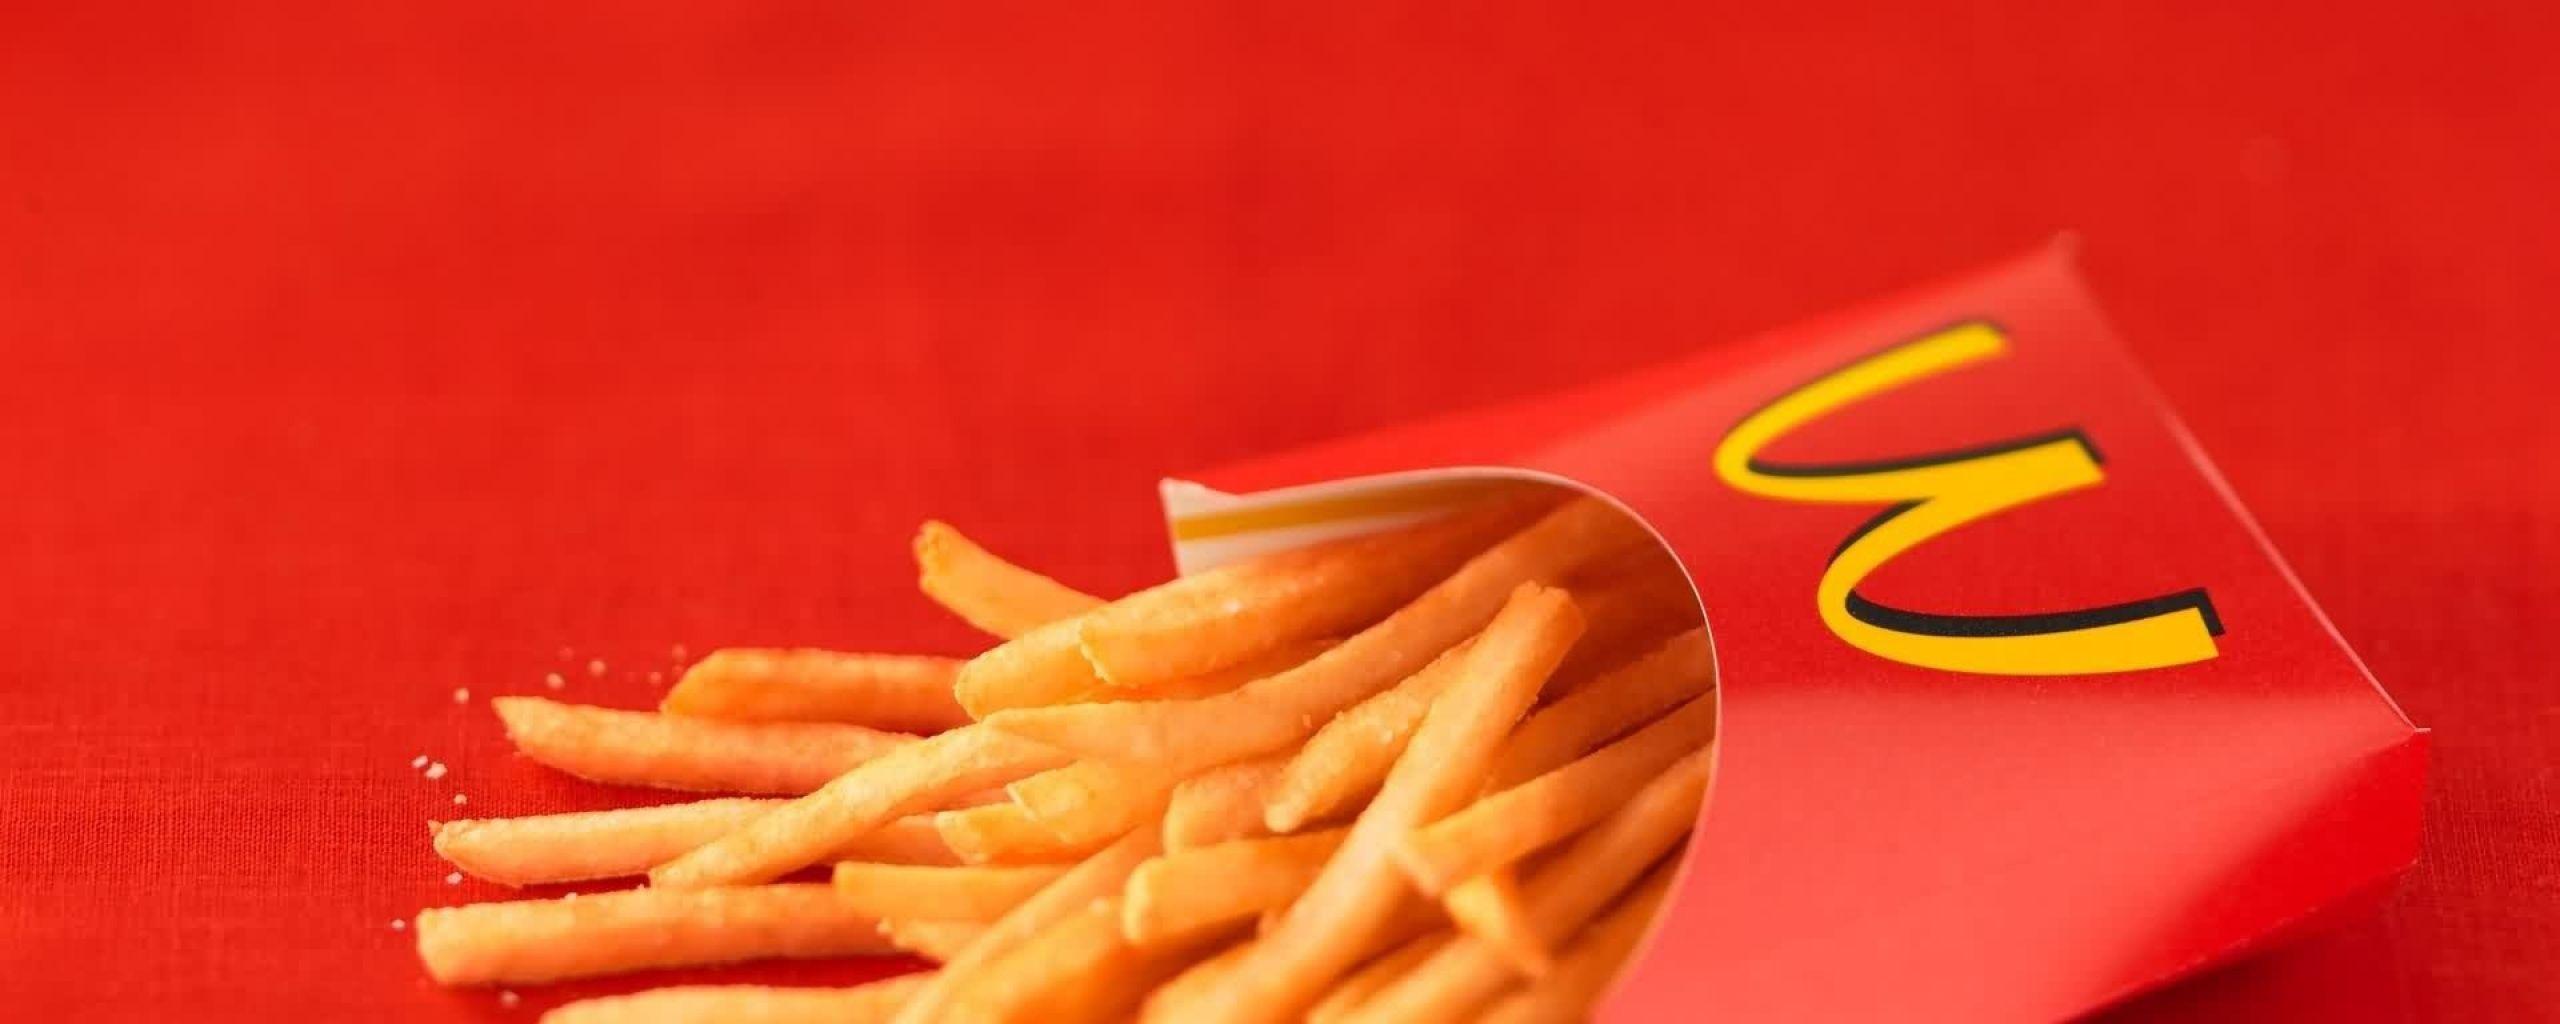 Fast French Fries wallpaperx1024